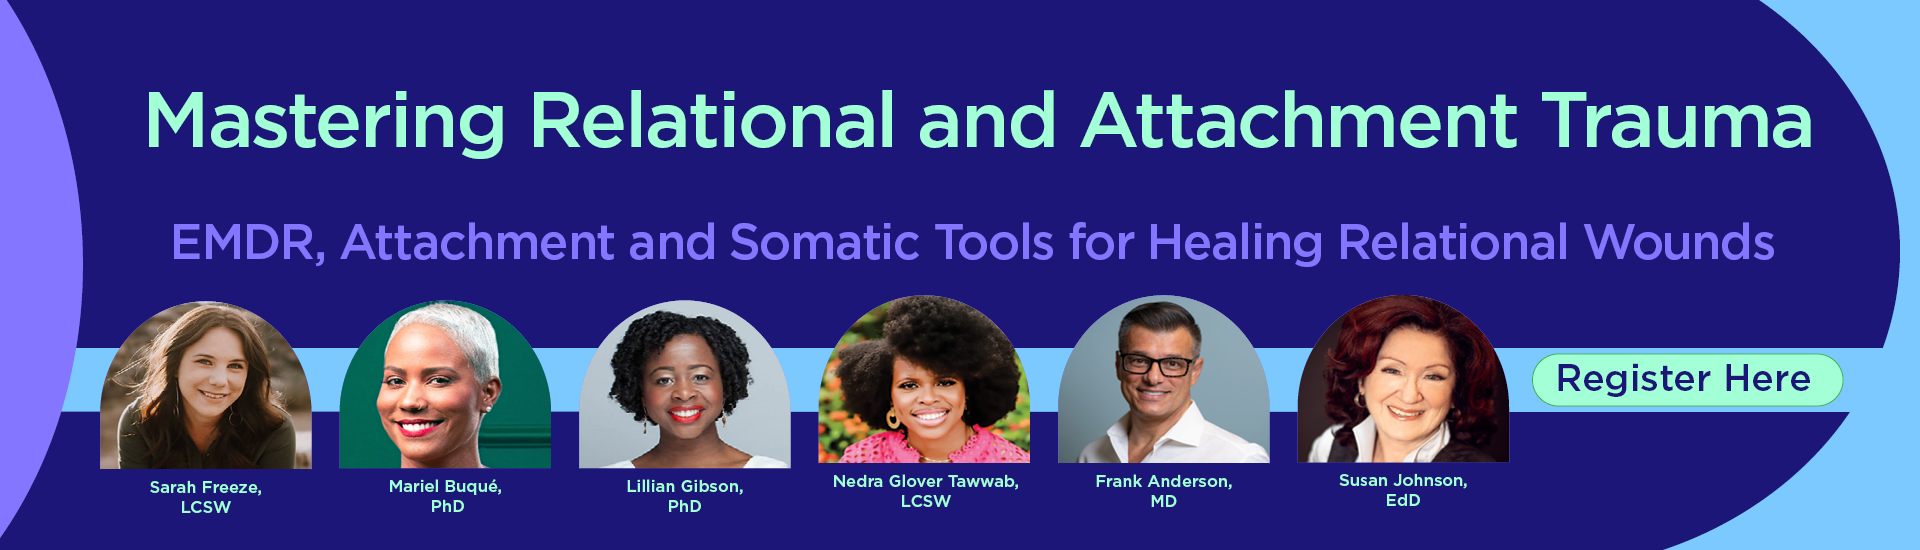 Mastering Relational and Attachment Trauma: EMDR, Attachment and Somatic Tools for Healing Relational Wounds